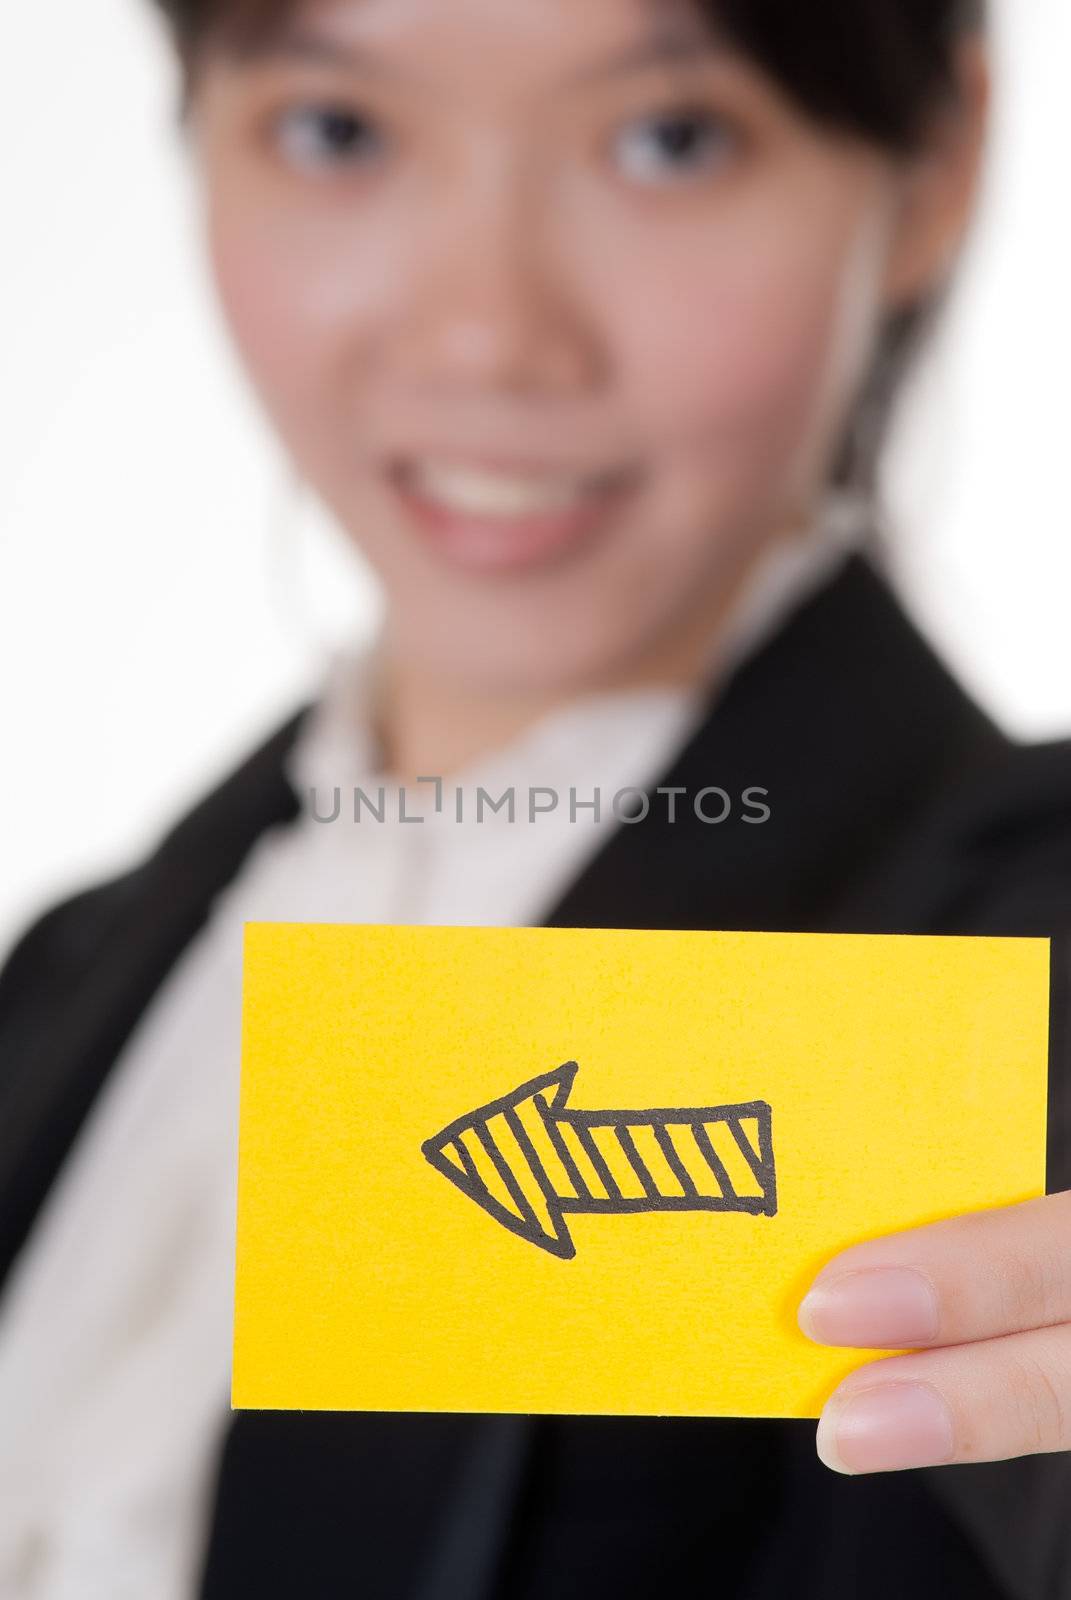 Left arrow on business card holding by Asian businesswoman.